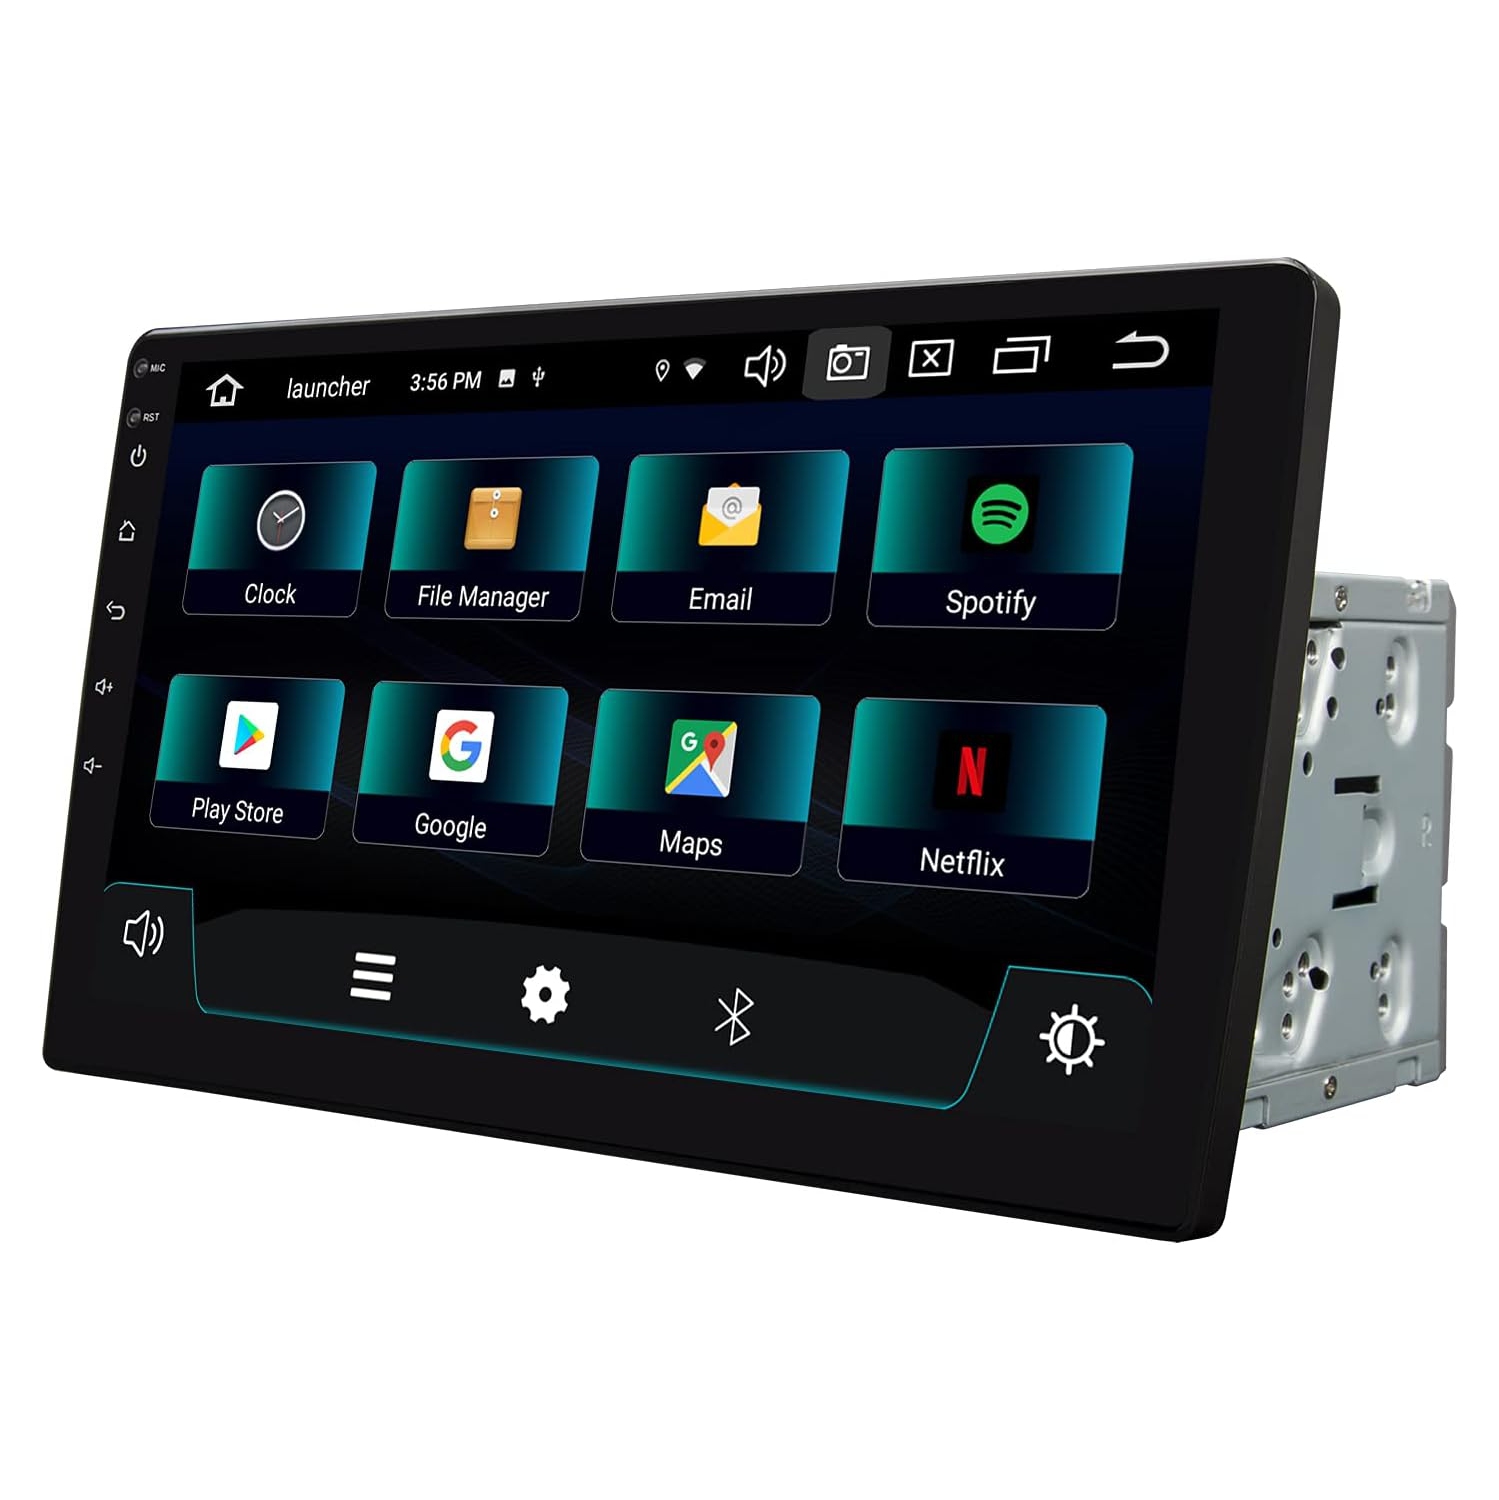 2022 Android 10.0 Double Din Car Stereo Eonon Octa Core 4GB+64GB Car Radio with GPS Navigation/IPS Display, Built-in Apple CarPlay & DSP Support Android Auto/Fastboot/Backup Camera